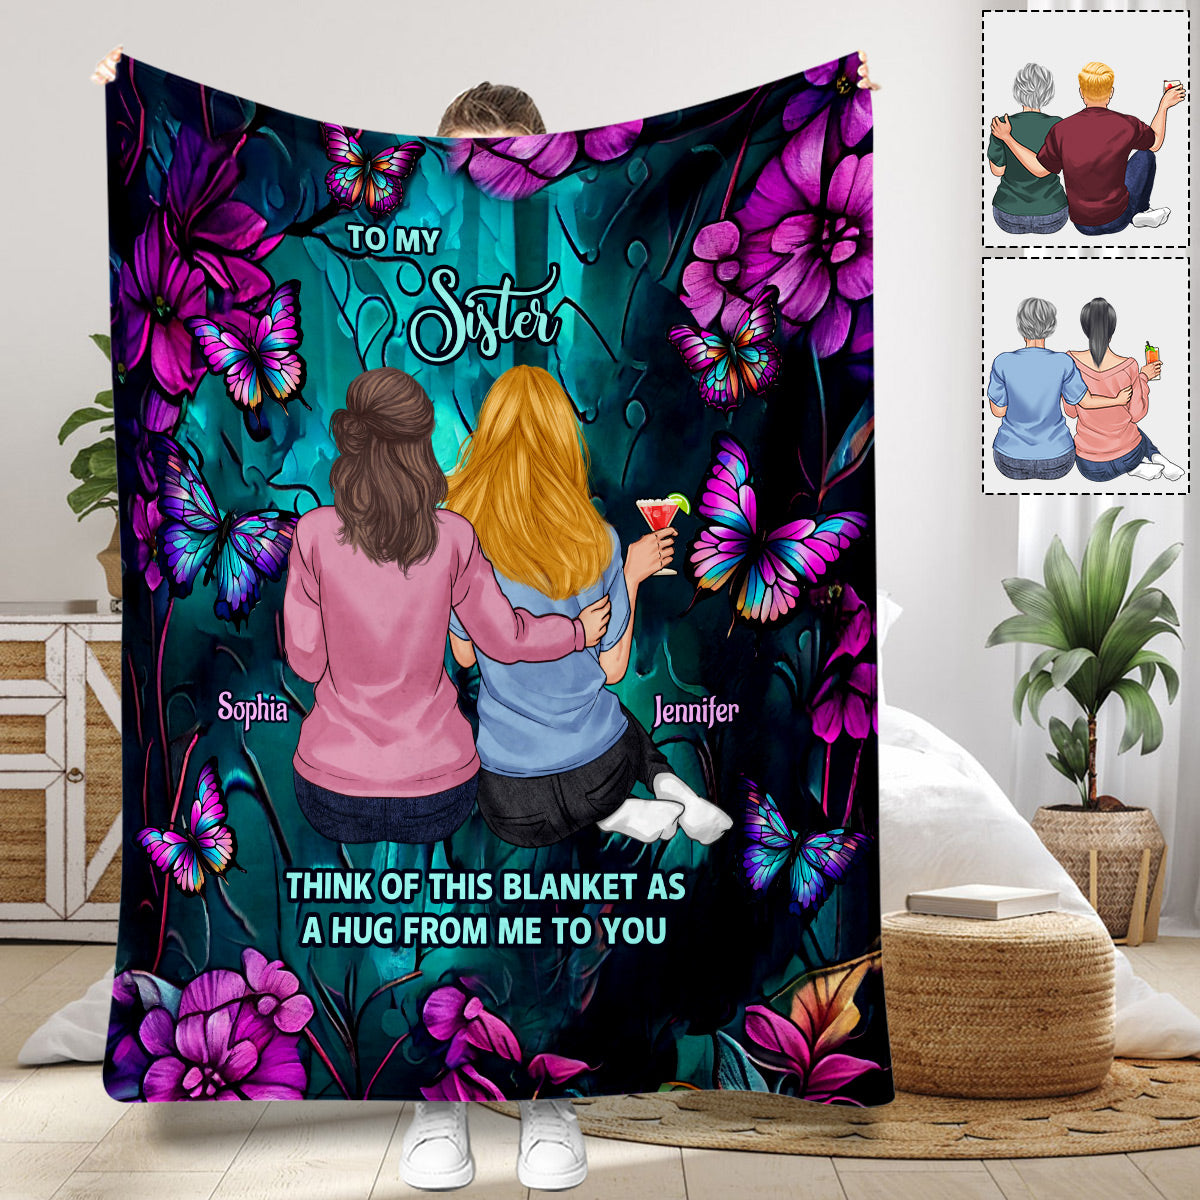 Besties Forever Teal And Purple Butterfly Blanket - Gift for friend - Personalized Blanket